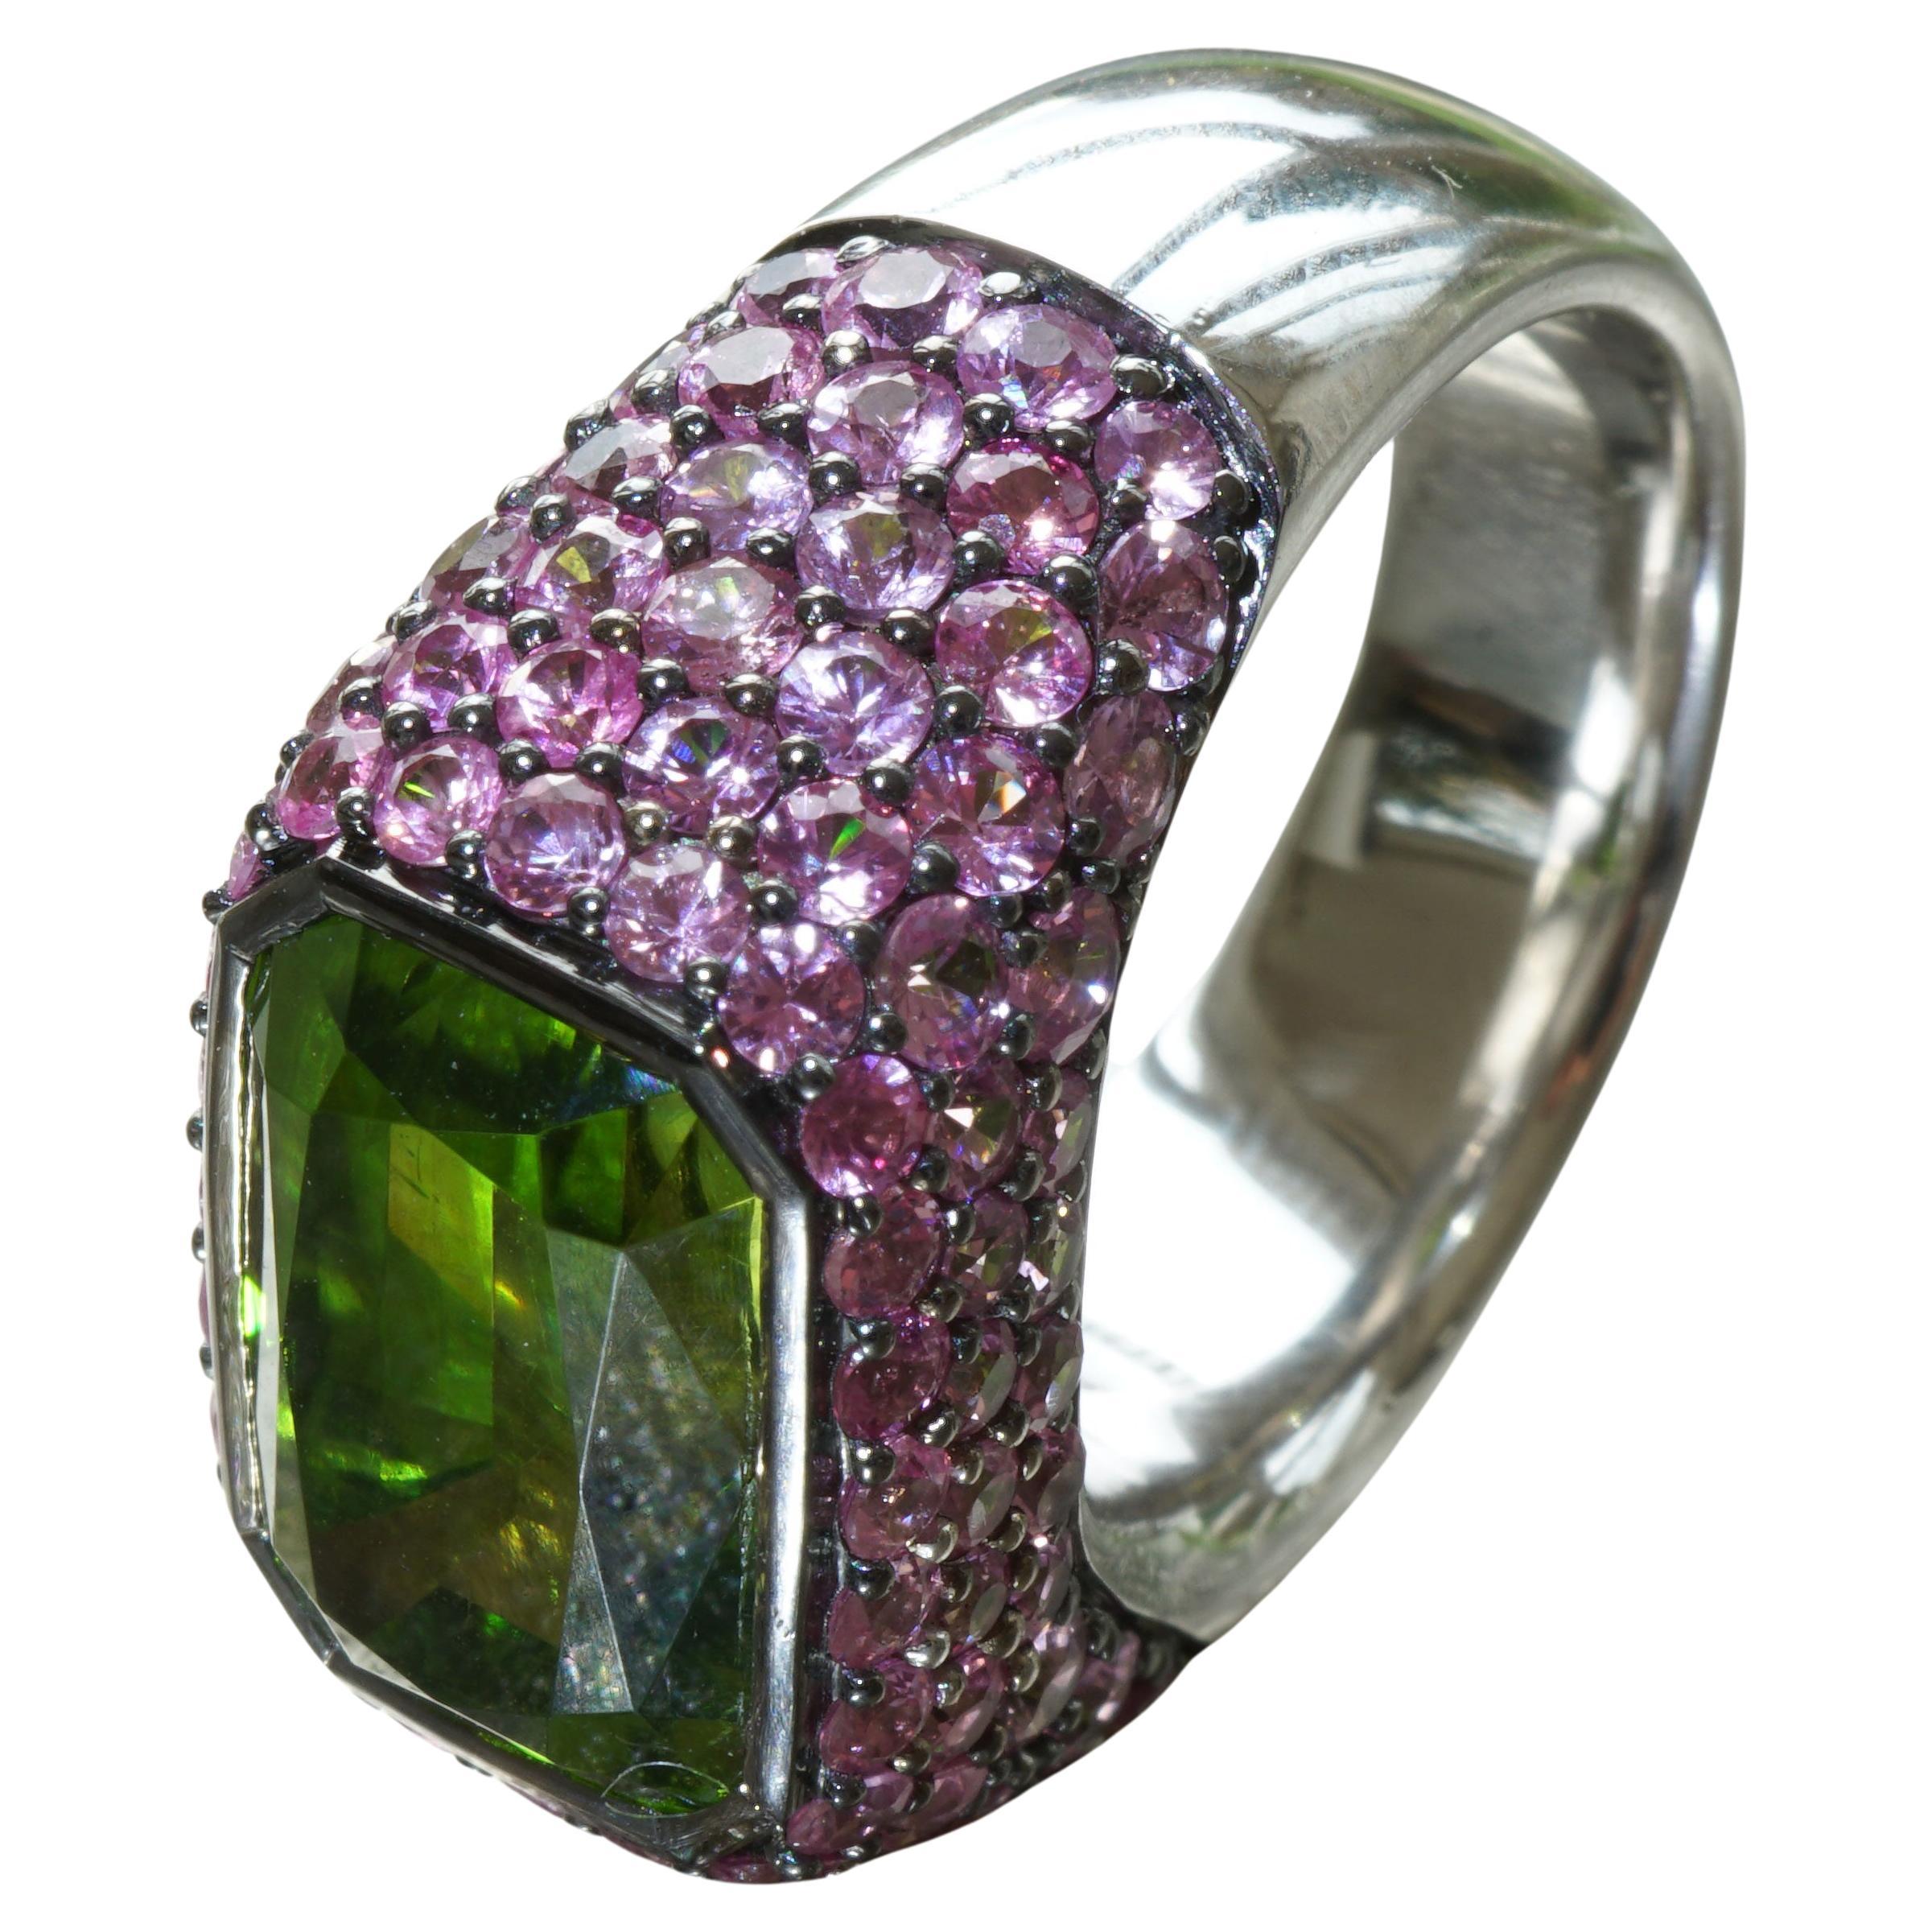 Supat Mine eyeclean Peridot Saphire Ring 9ct AAA+ rare World Famous Apple Green  For Sale